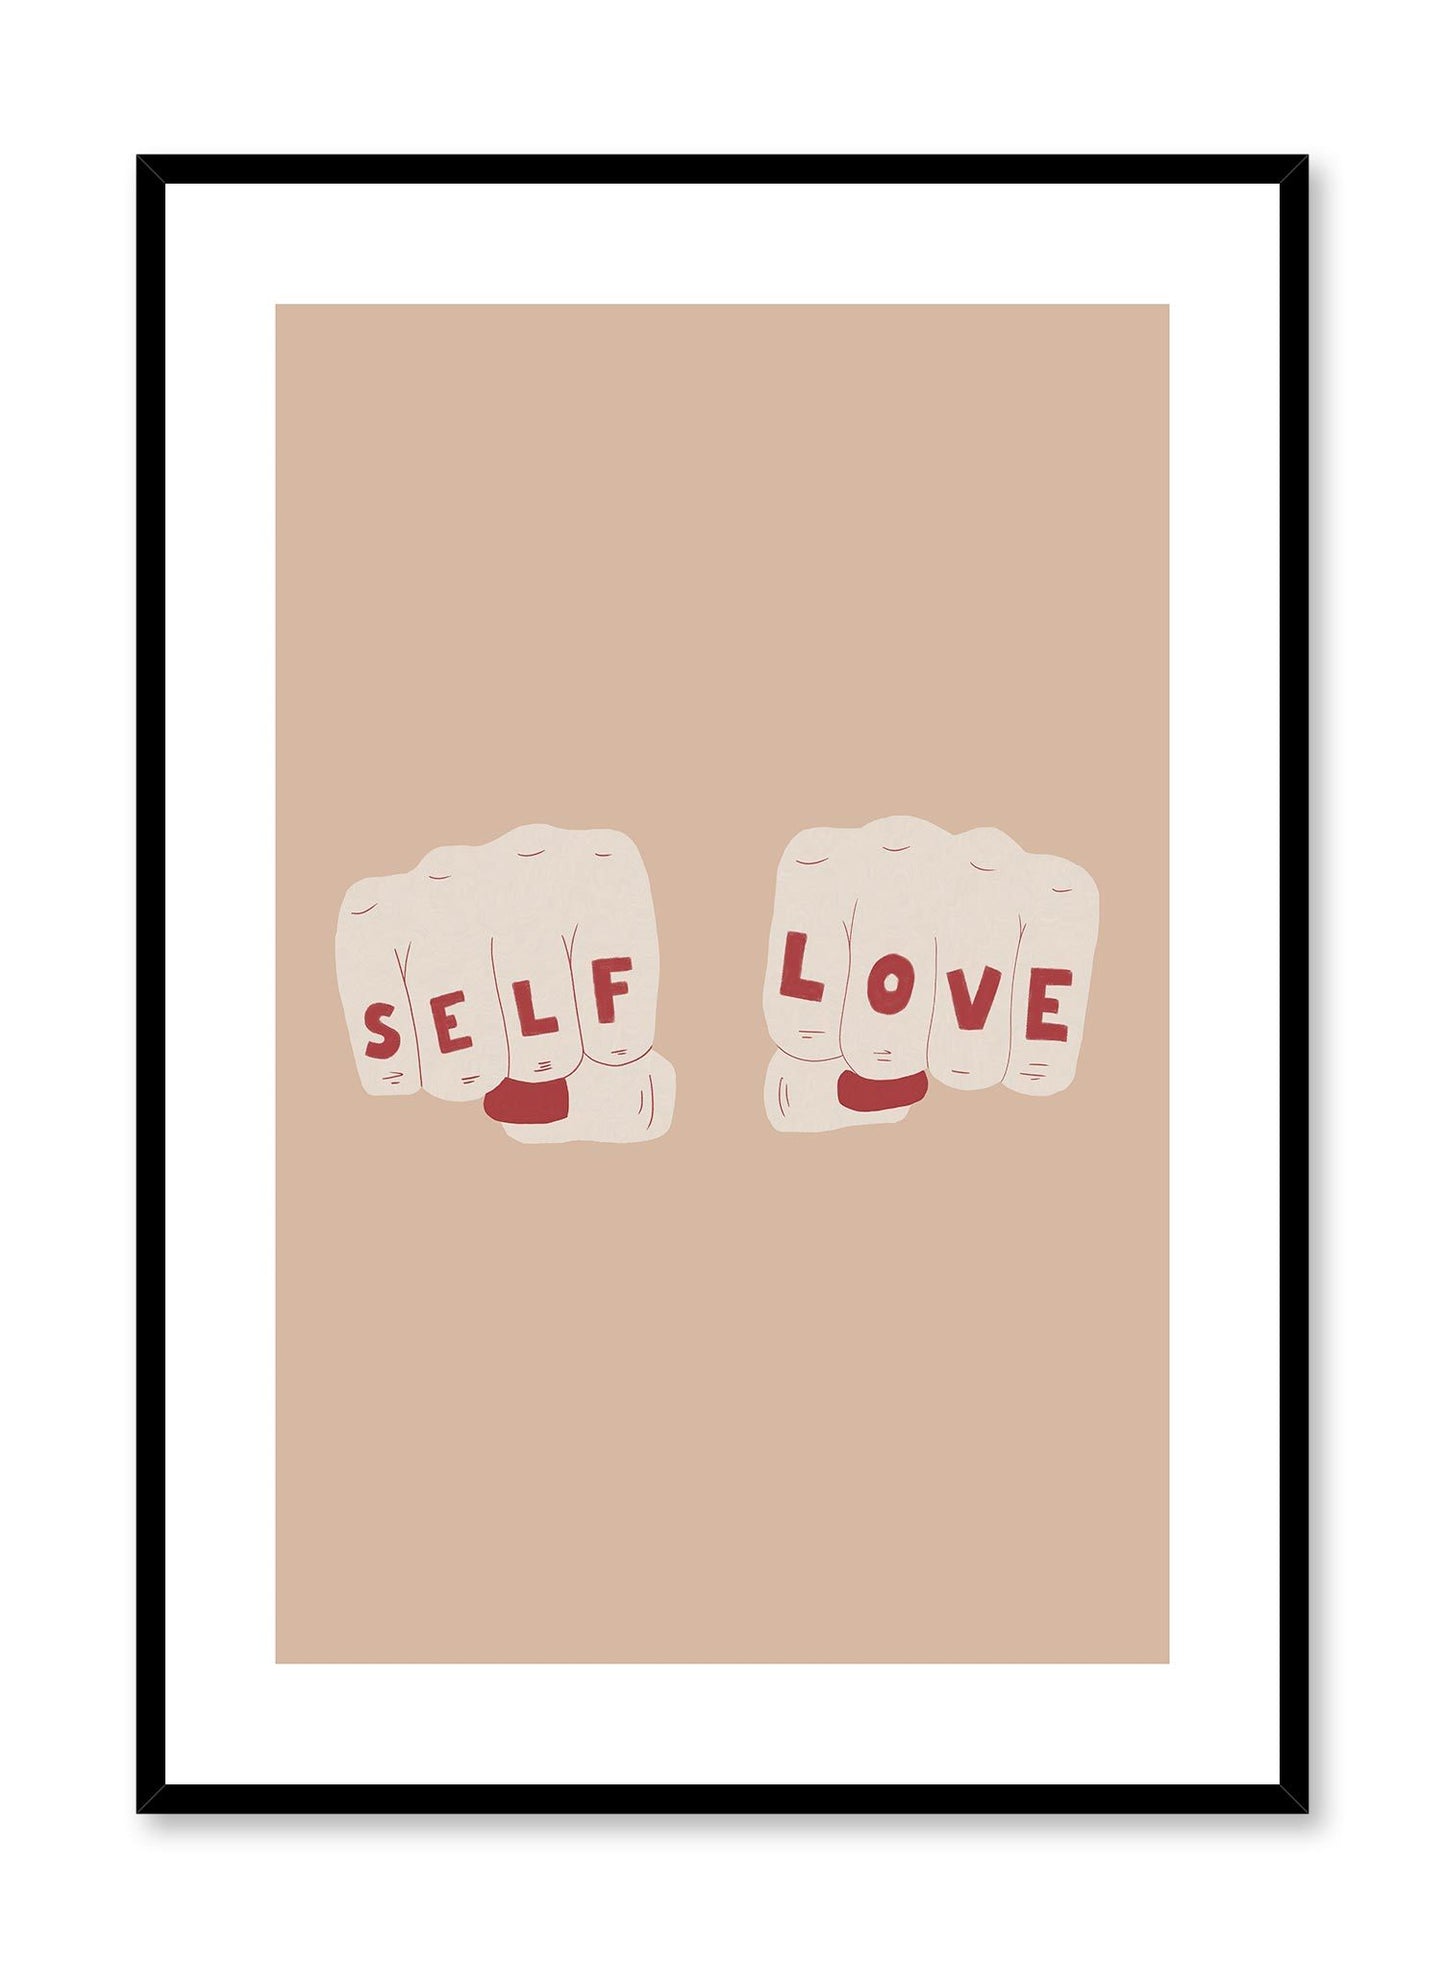 Self Love Club is a minimalist illustration by Opposite Wall of two fists showing off the message "Self Love" on each side. 